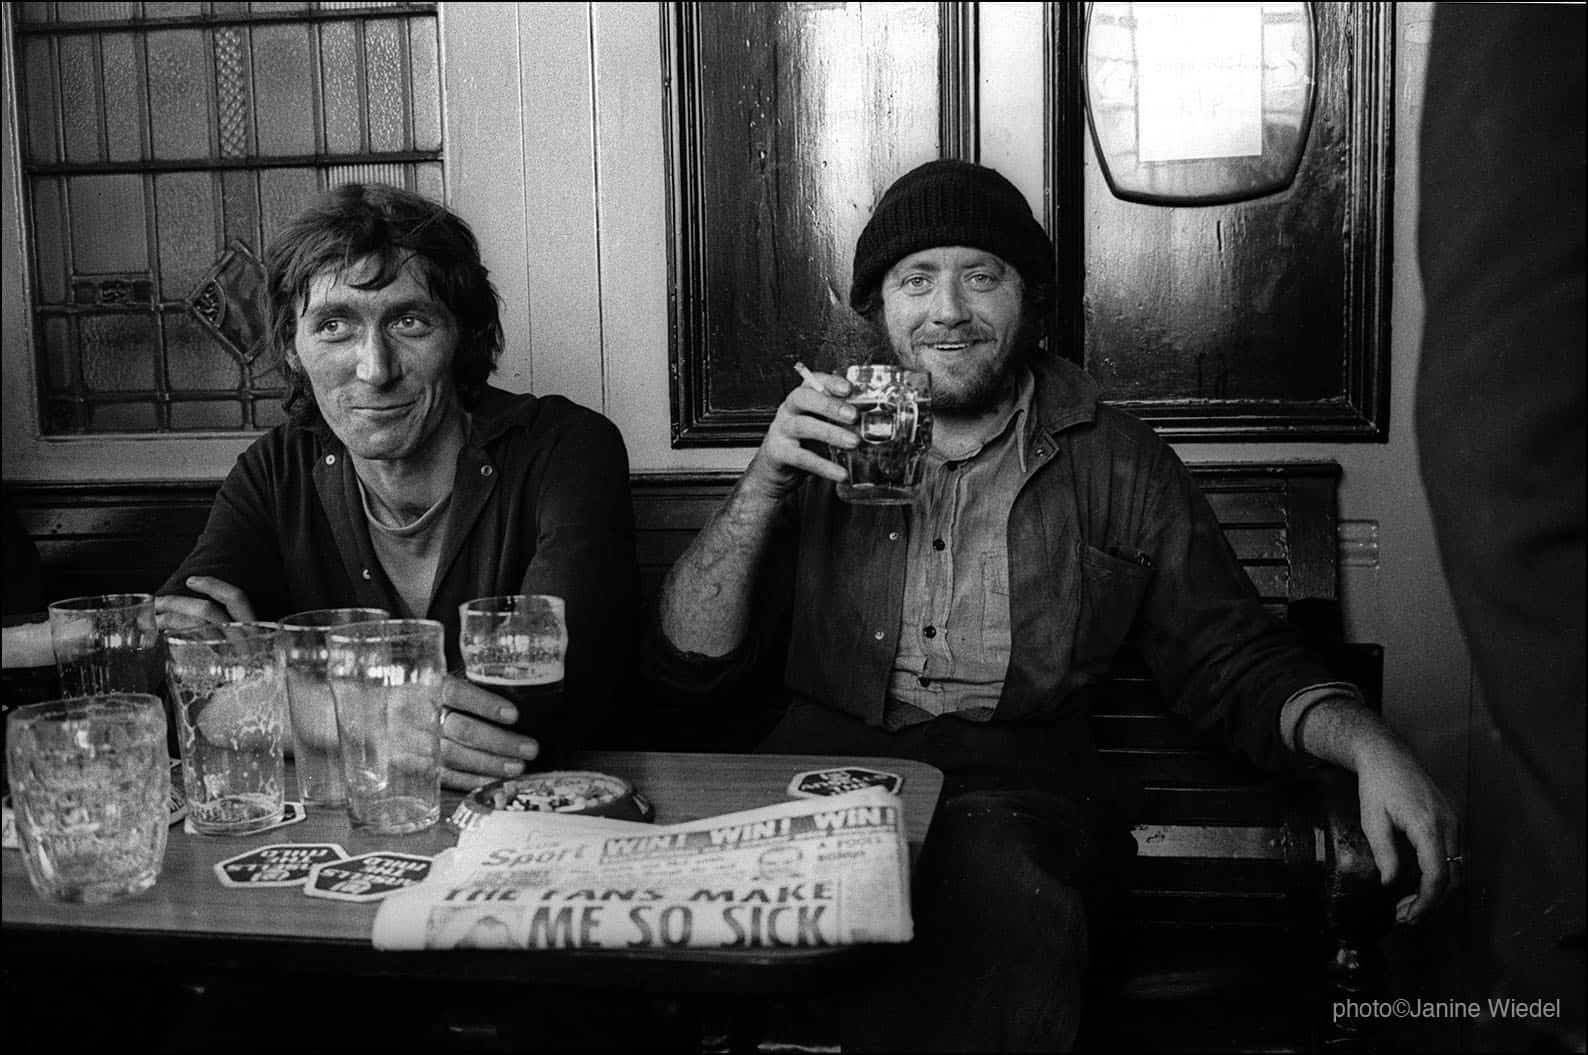 Workers in the local pub in Aston Birmingham relaxing after a hard shift in the drop forge next door.